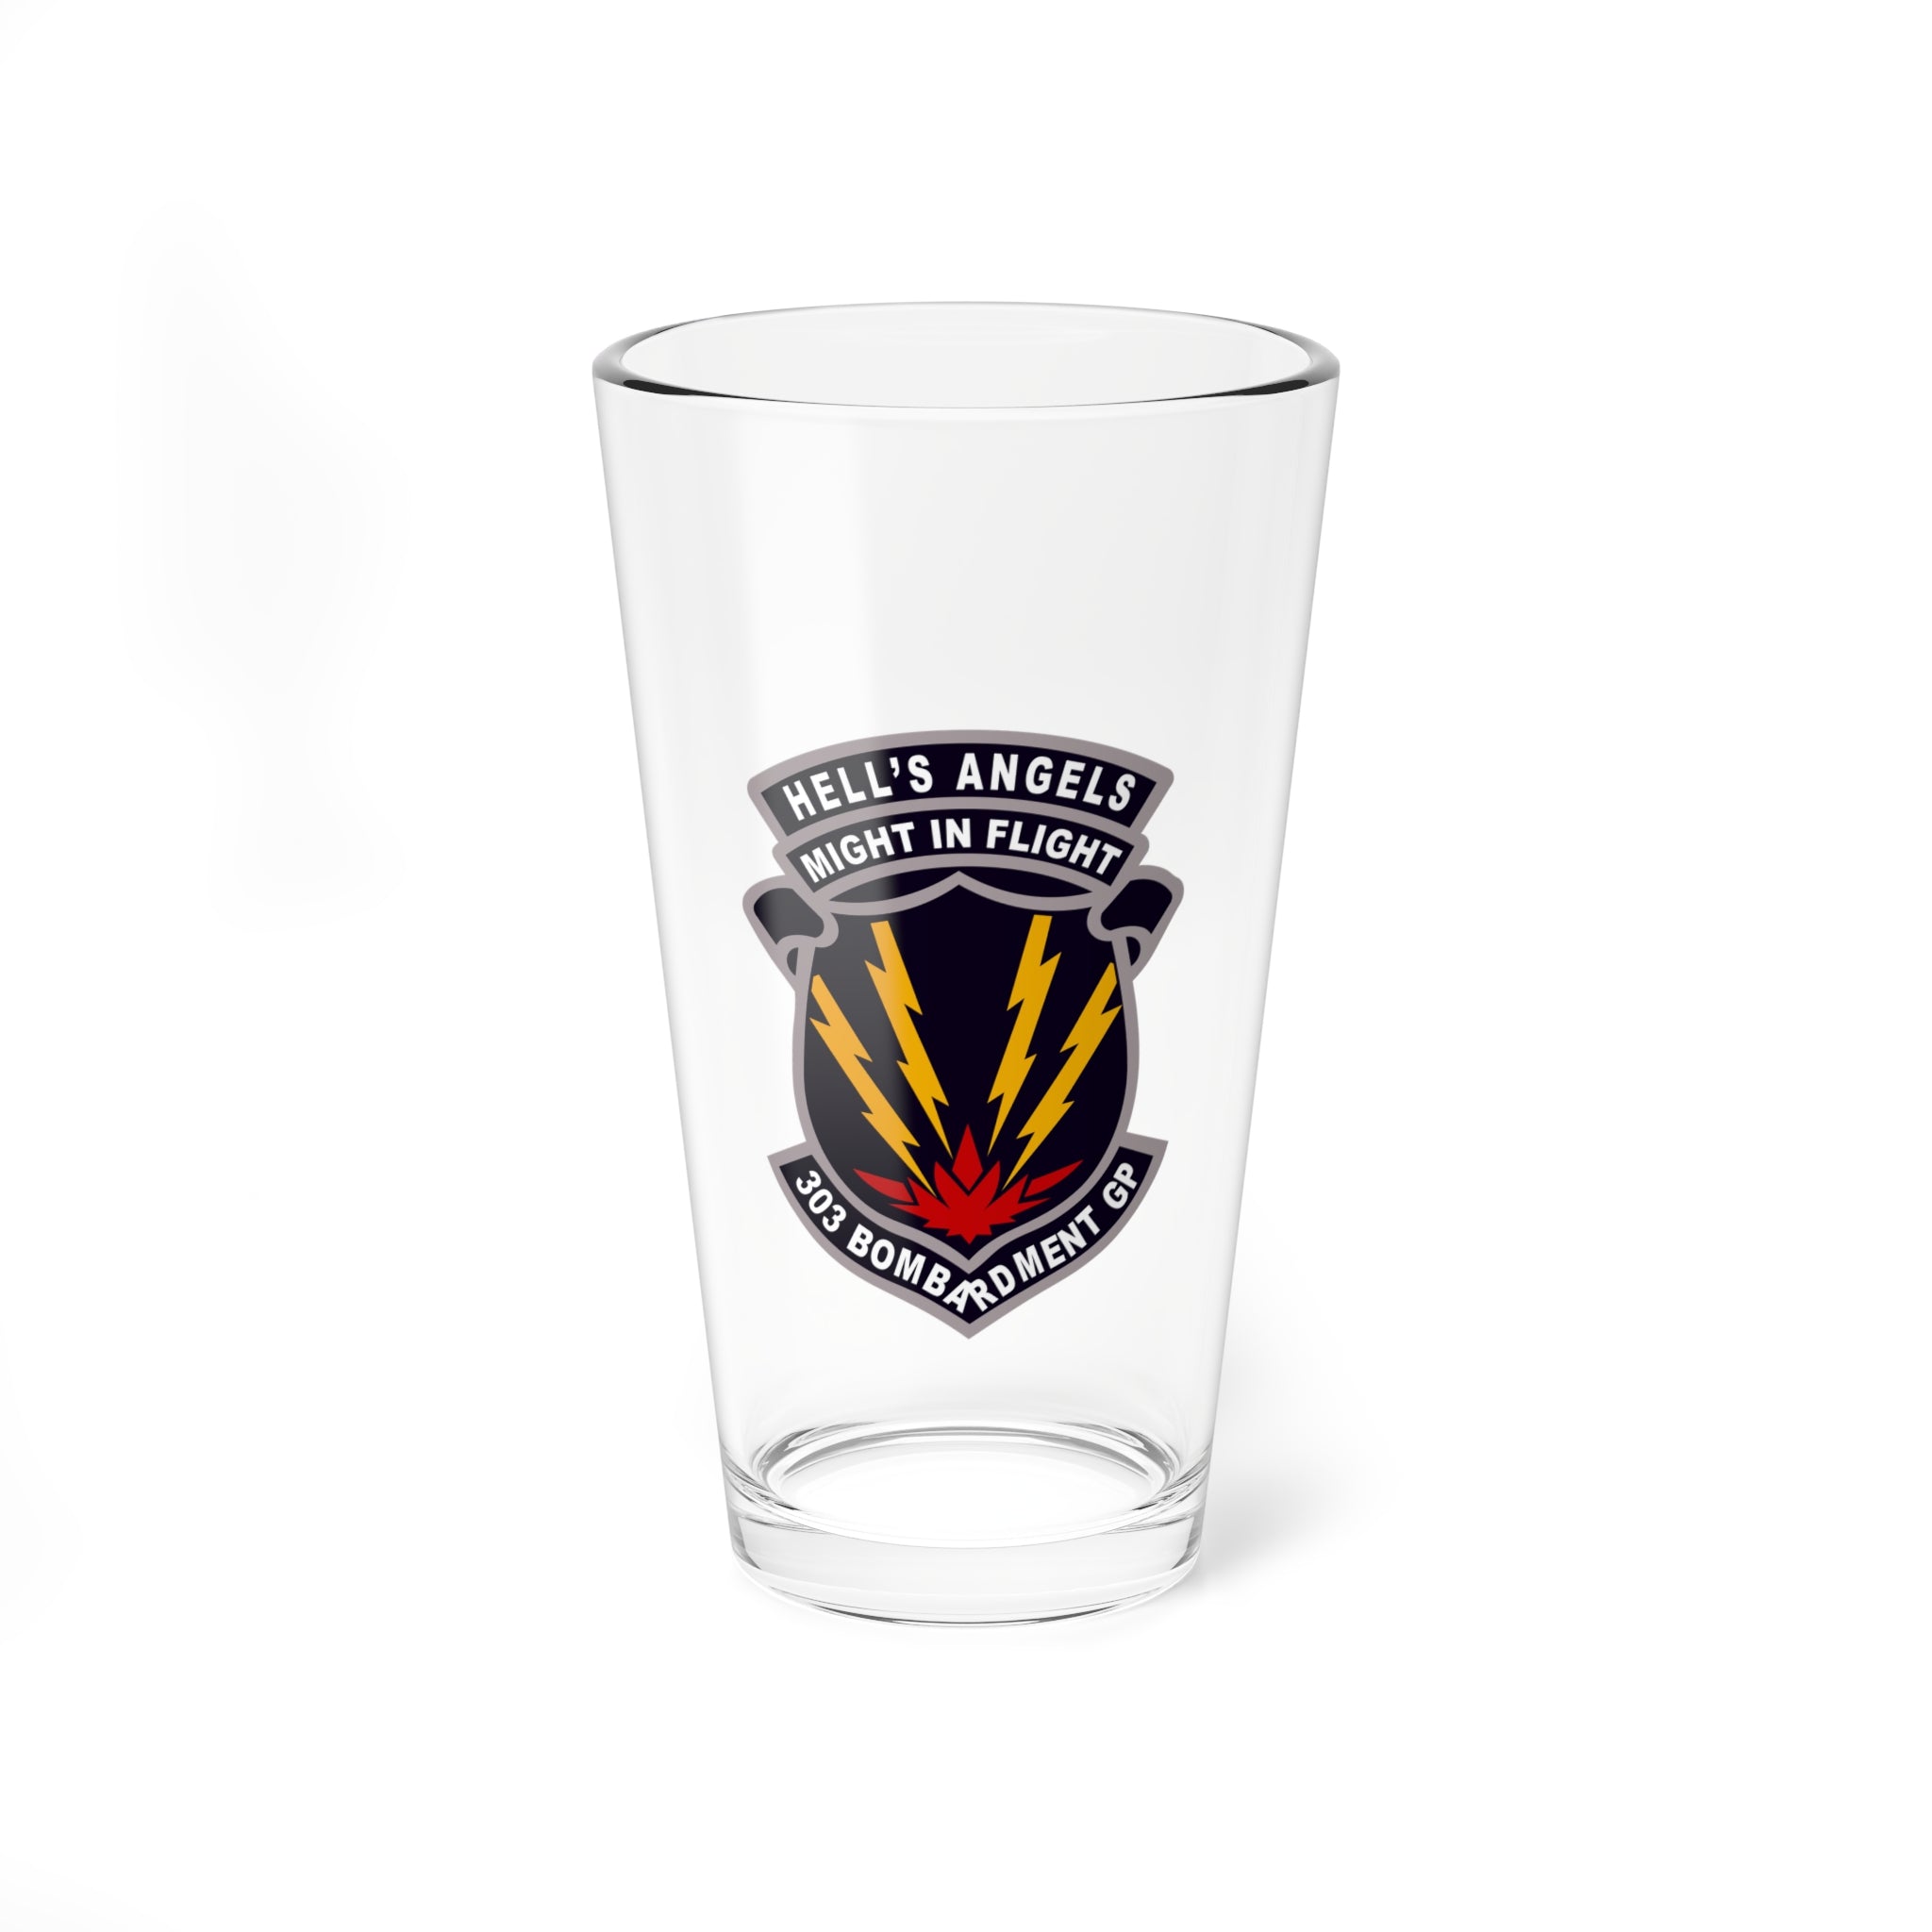 303rd Bombardment Group Pint Glass, US Army Air Force Bomb Group from WWII